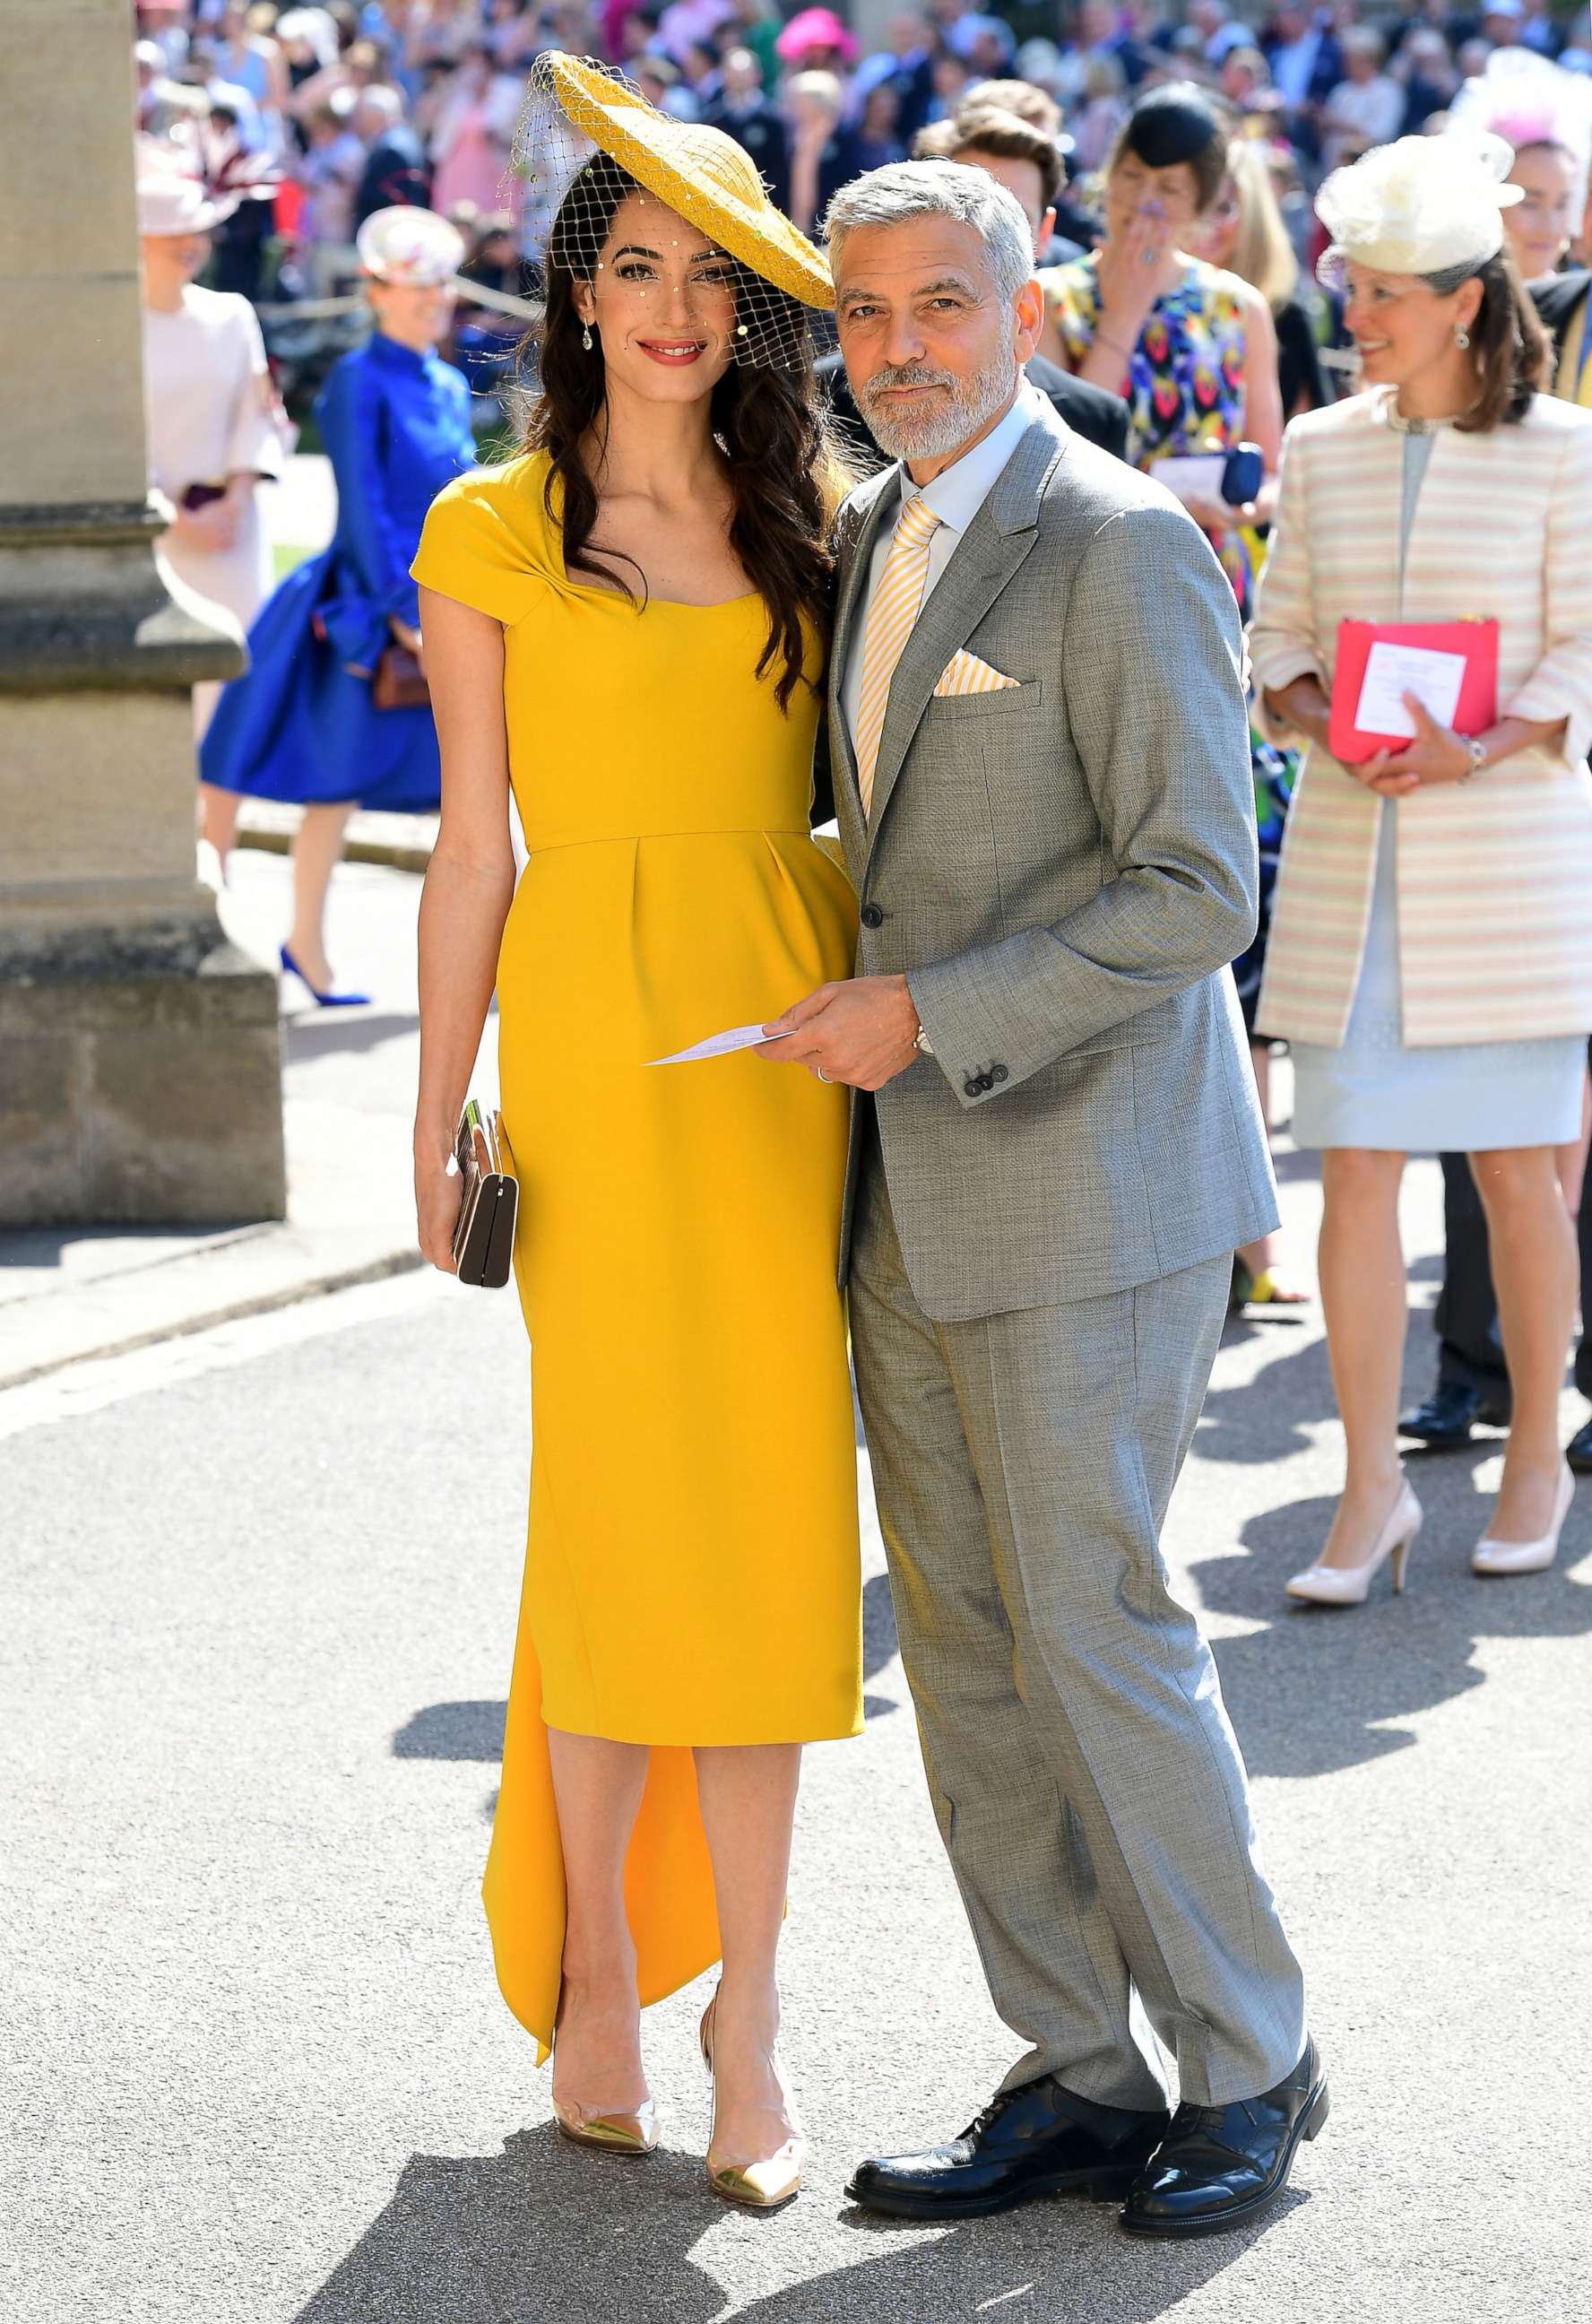 PHOTO: Amal and George Clooney arrive at St George's Chapel at Windsor Castle before the wedding of Prince Harry to Meghan Markle on May 19, 2018 in Windsor.